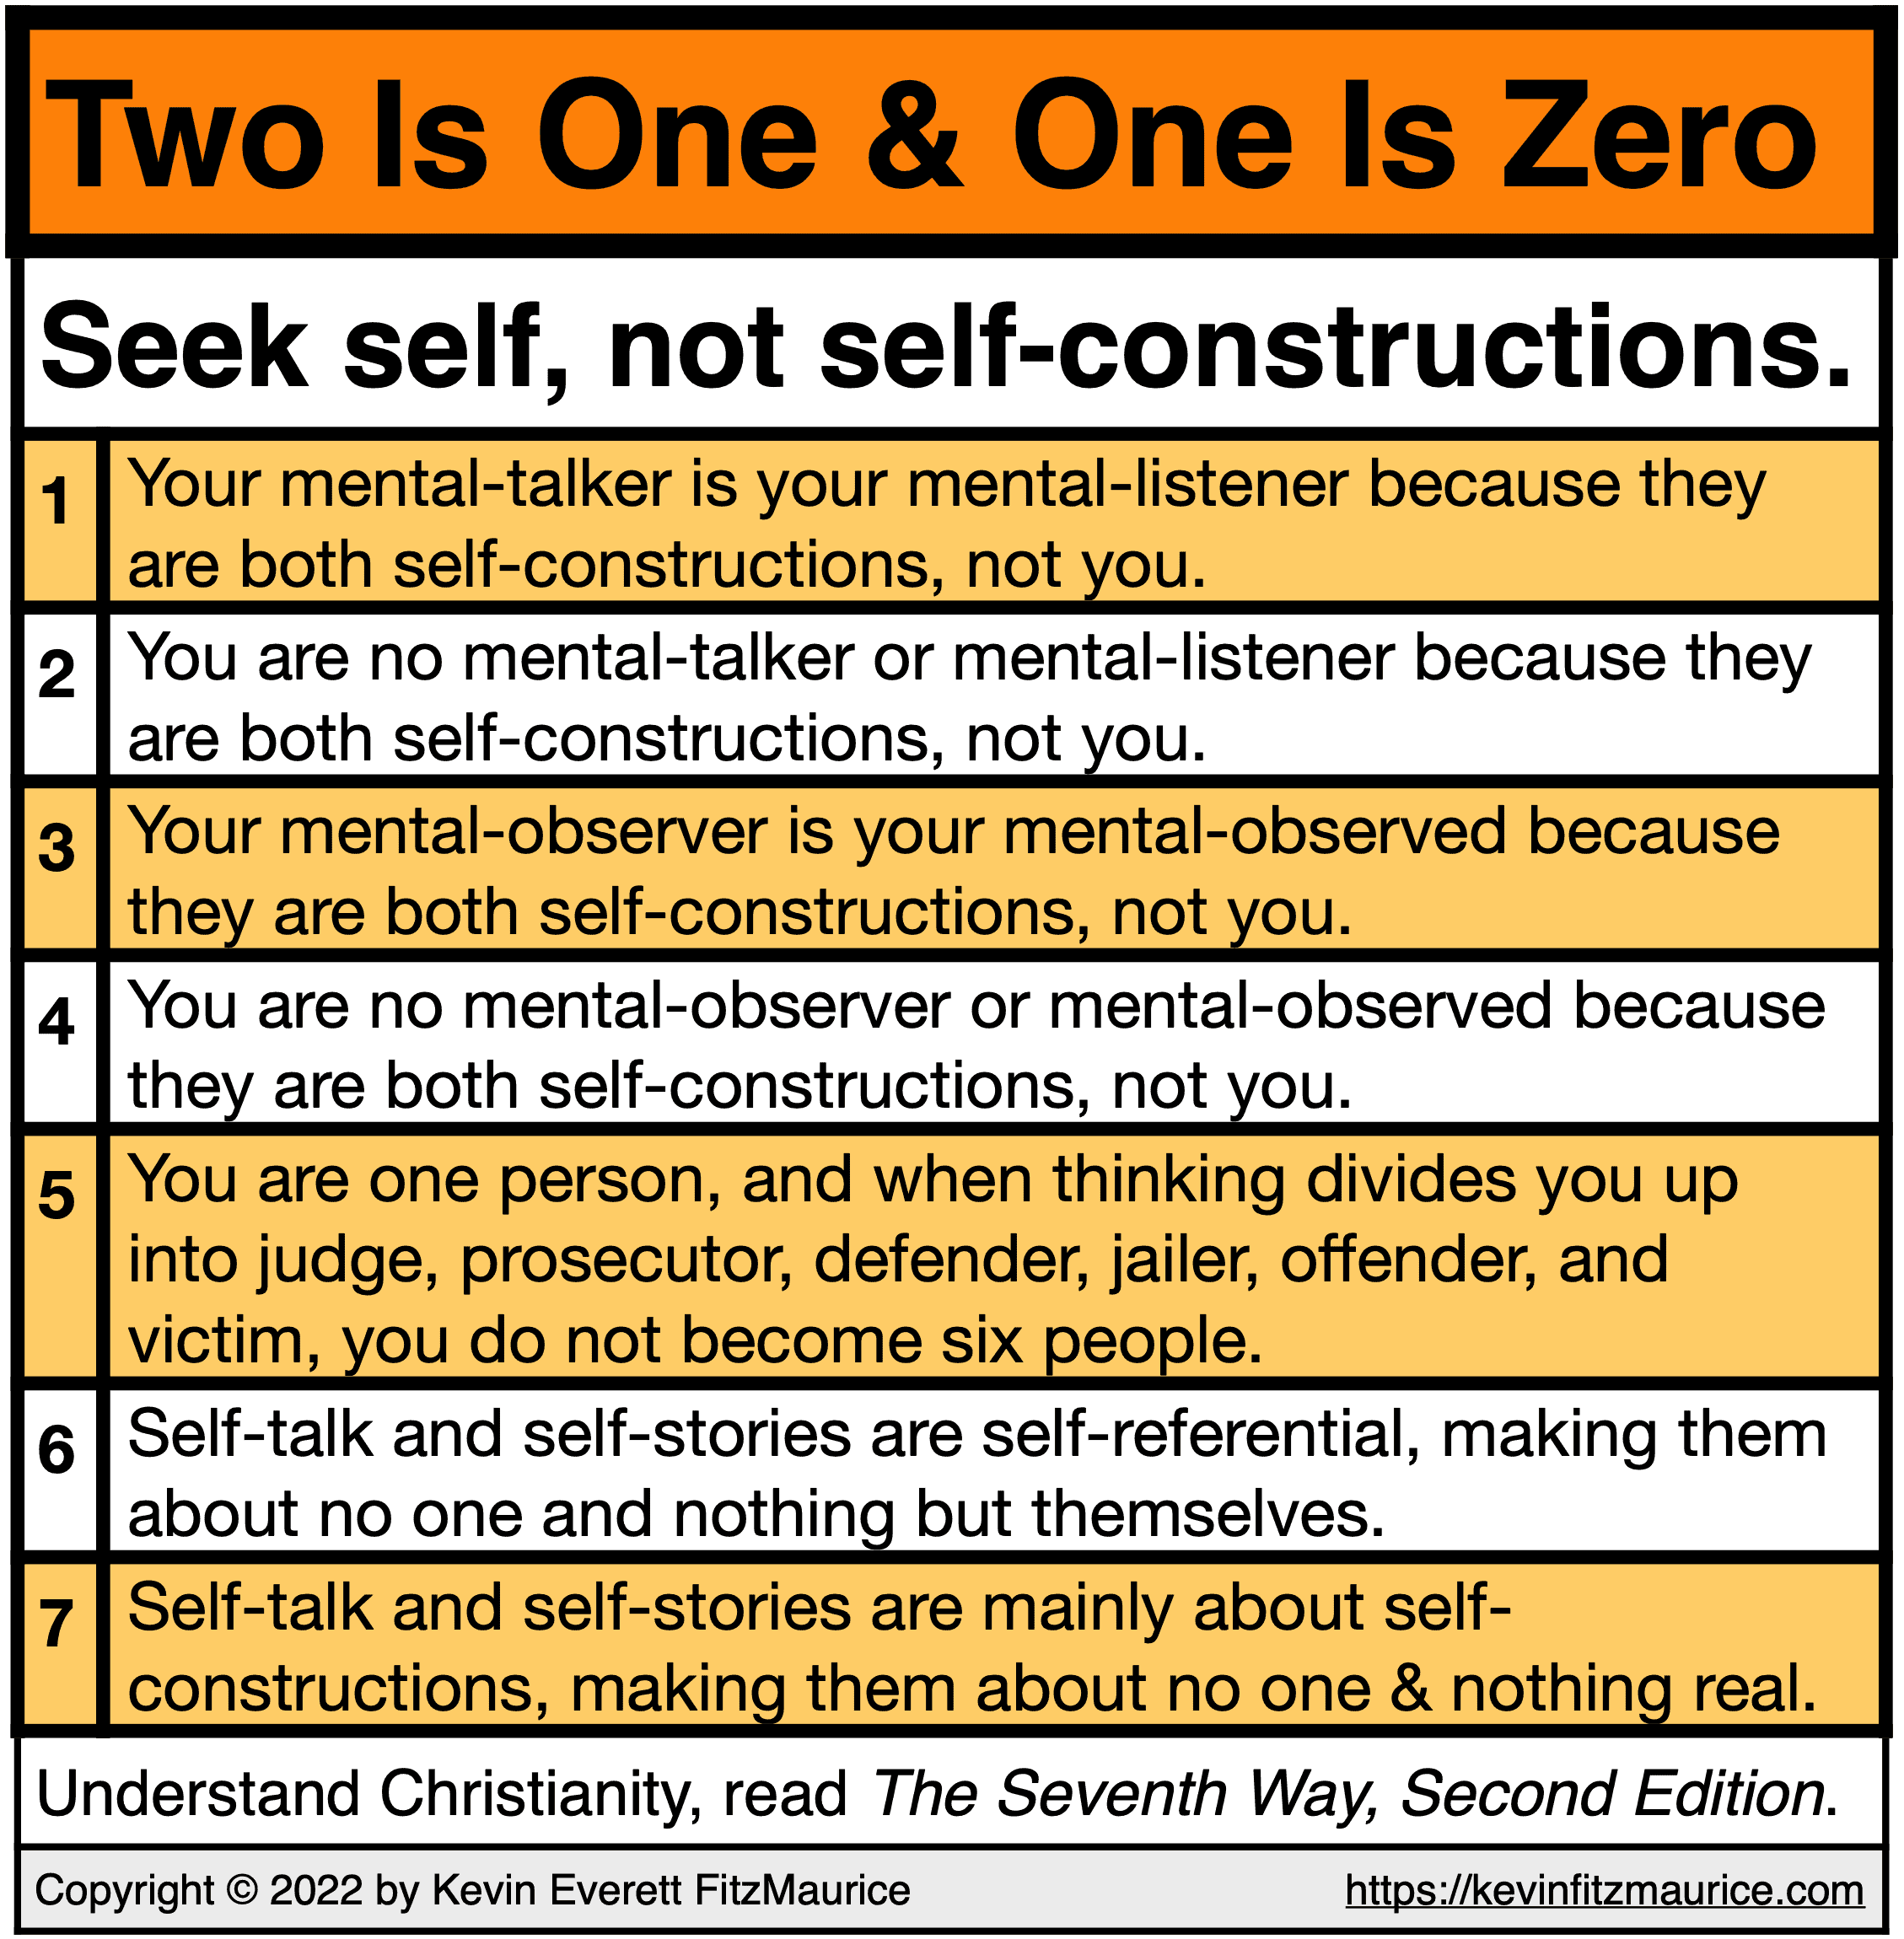 Two Is One & One Is Zero